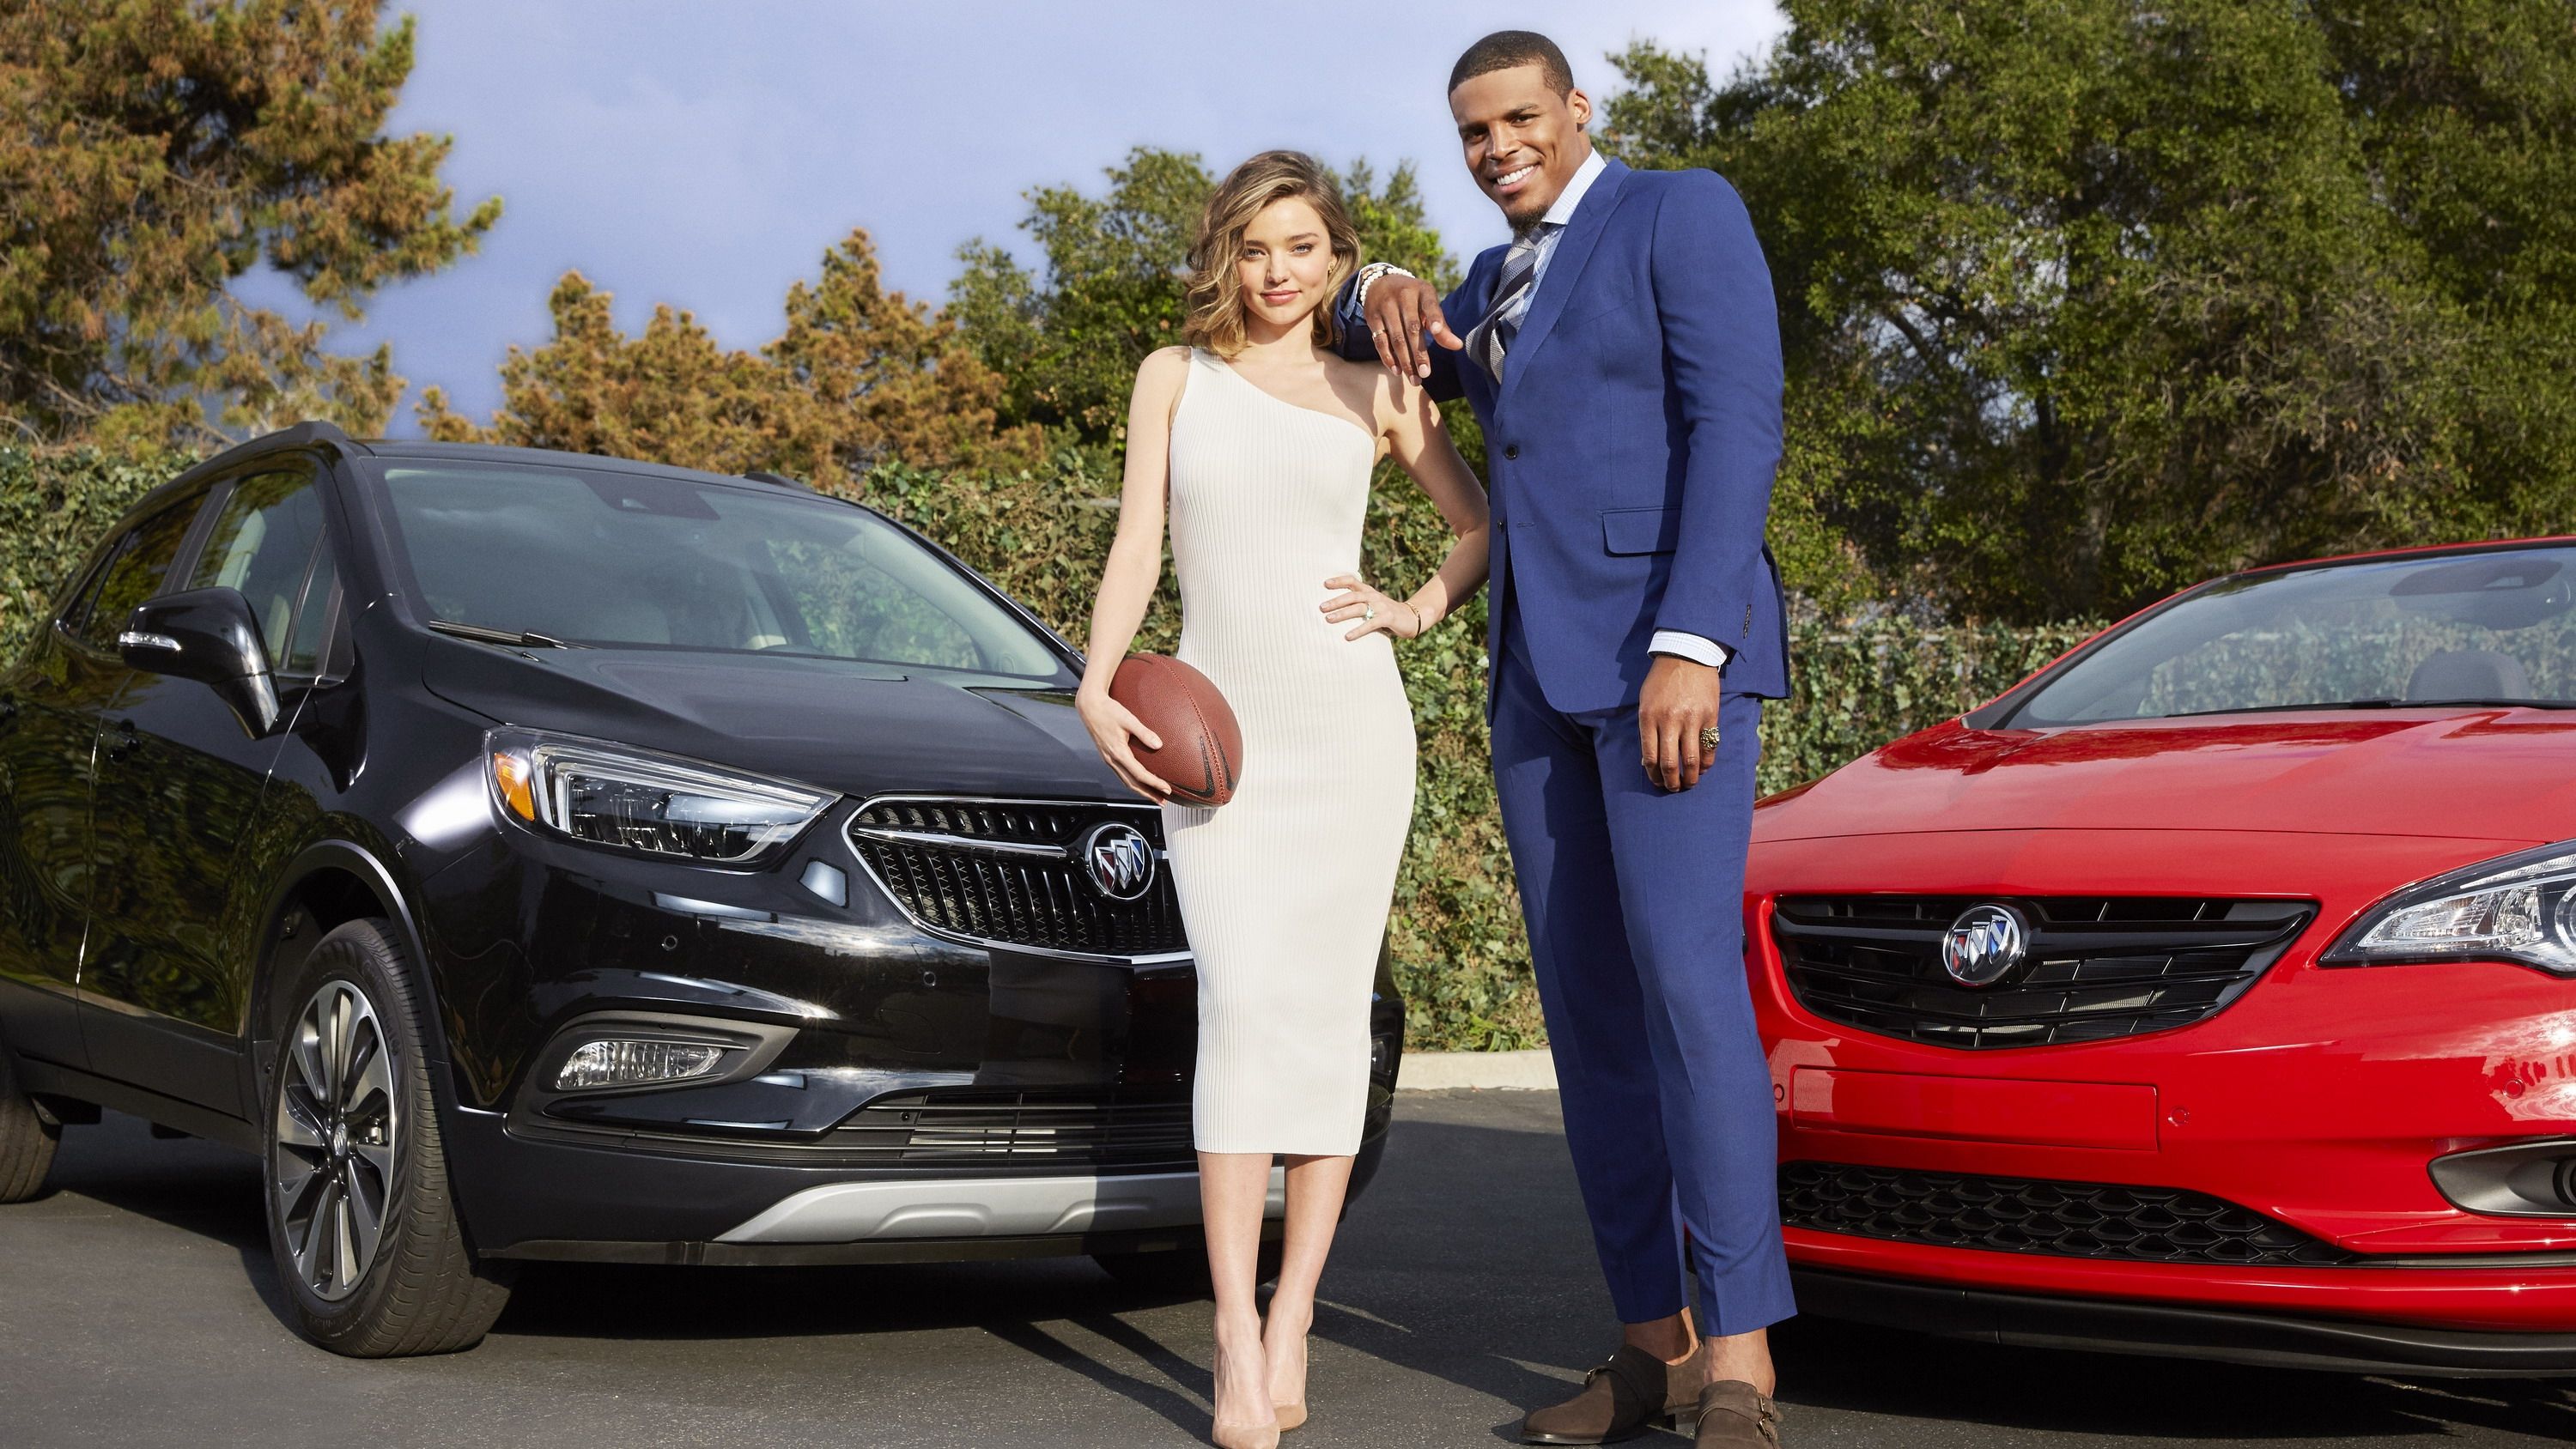 2017 Buick Goes Star-Studded Route For Its Super Bowl LI Commercial